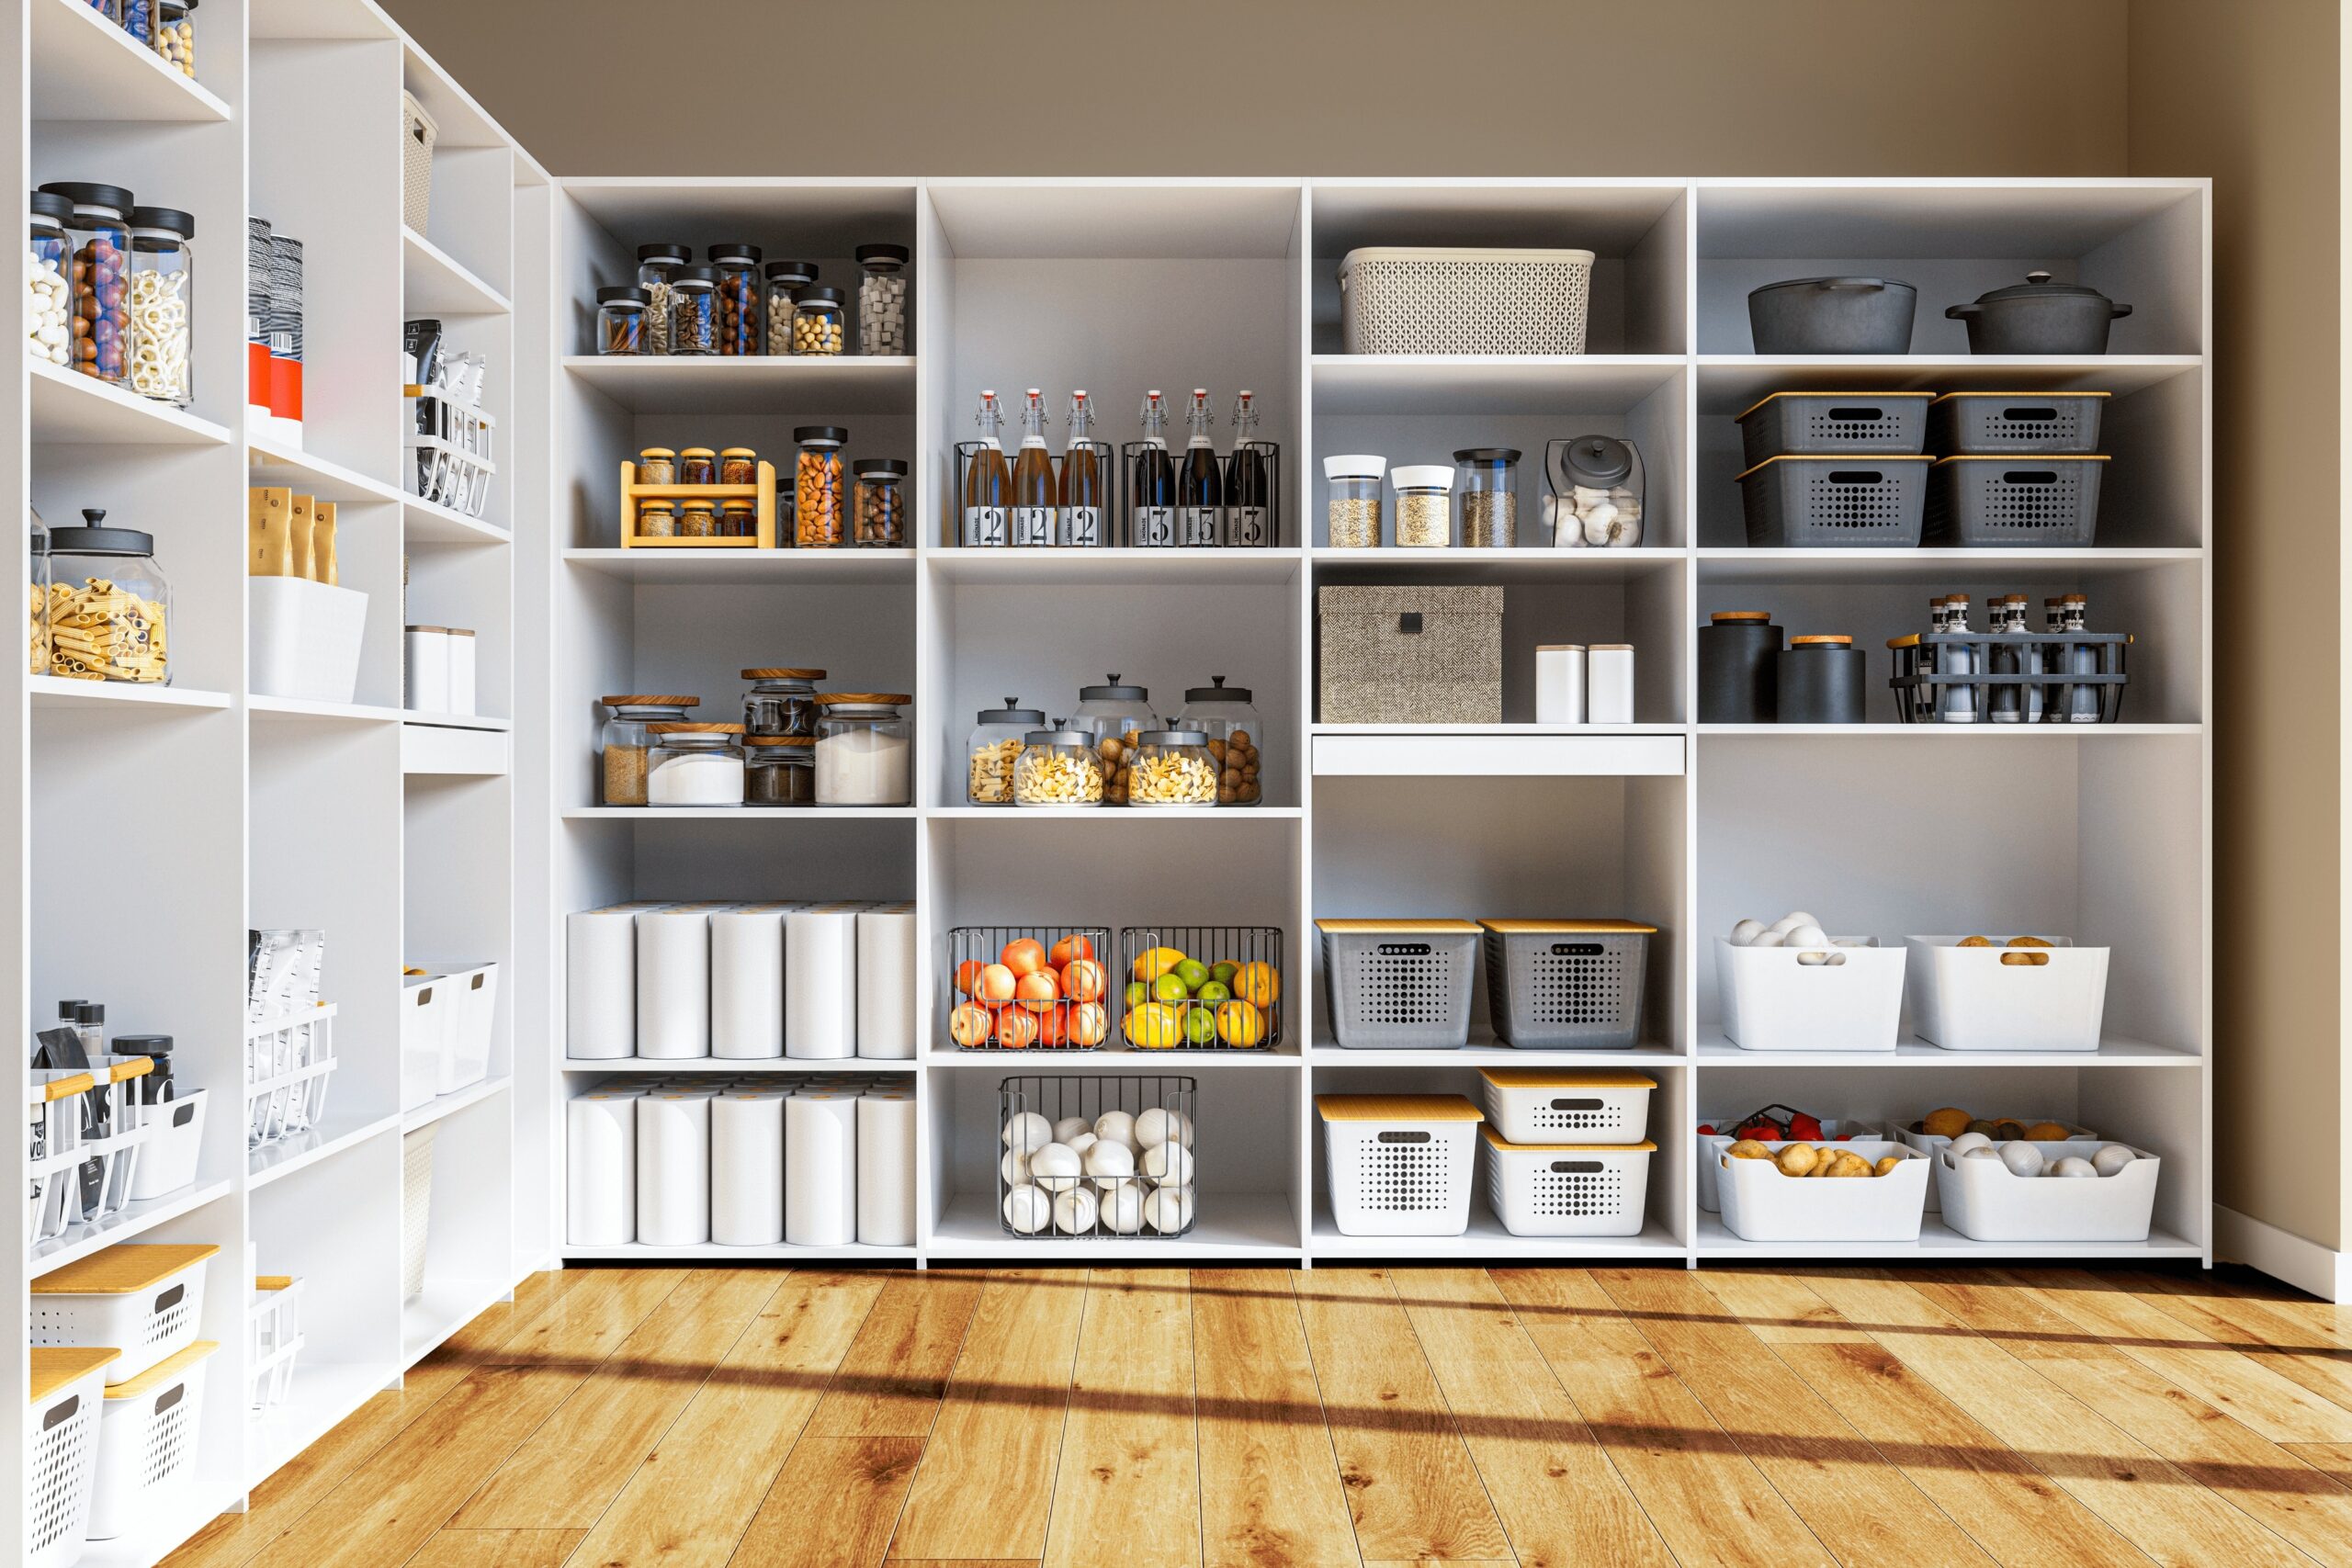 Pantry dimensions - pantry size guide